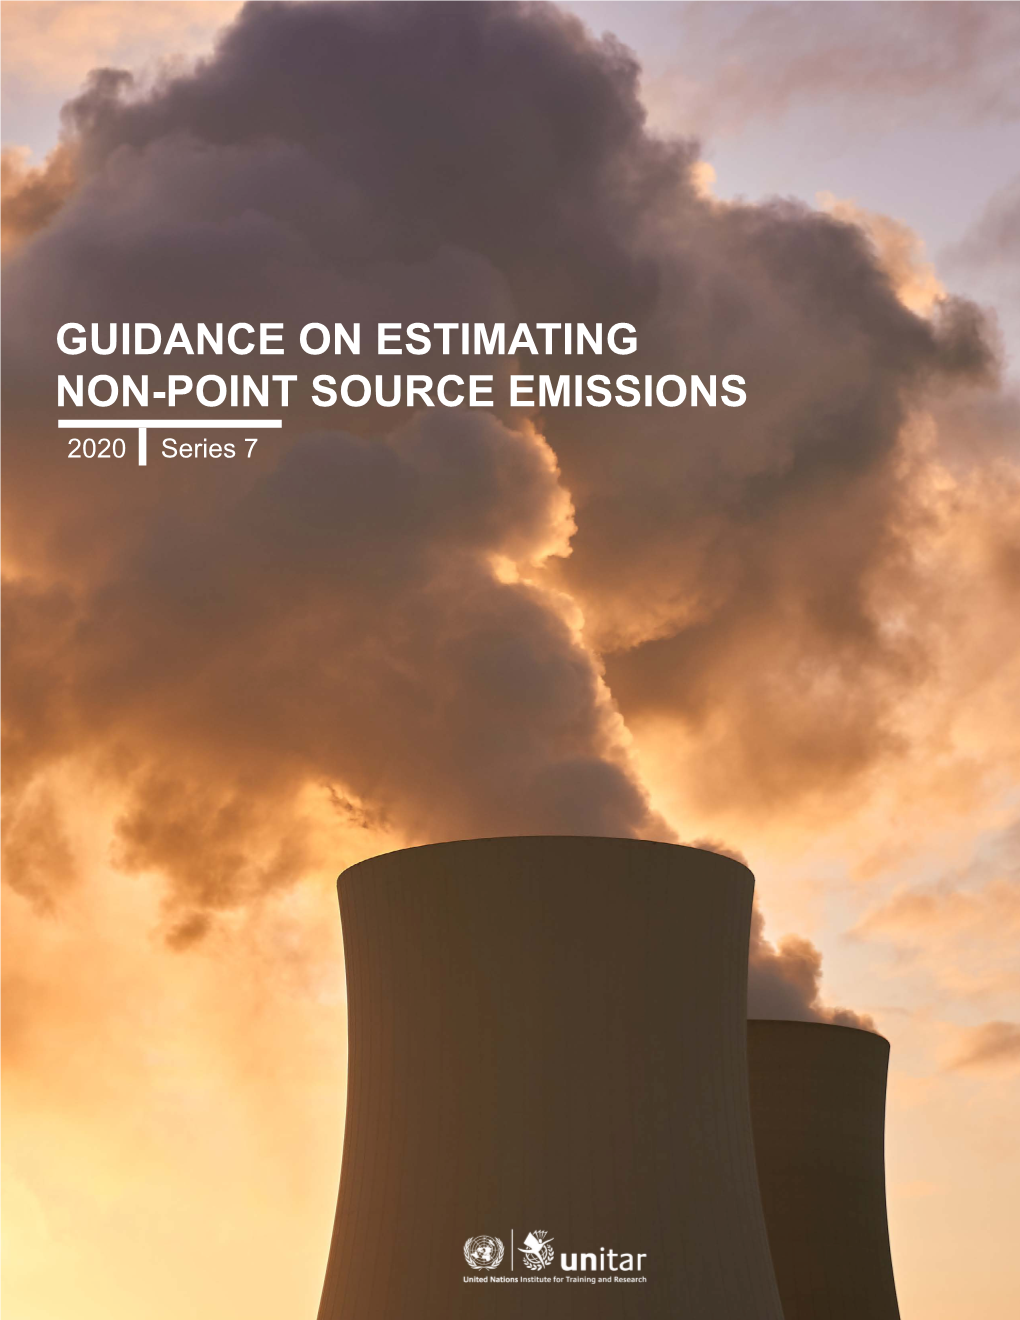 GUIDANCE on ESTIMATING NON-POINT SOURCE EMISSIONS 2020 Series 7 Guidance on Estimating Non-Point Source Emissions 2020 Series 7